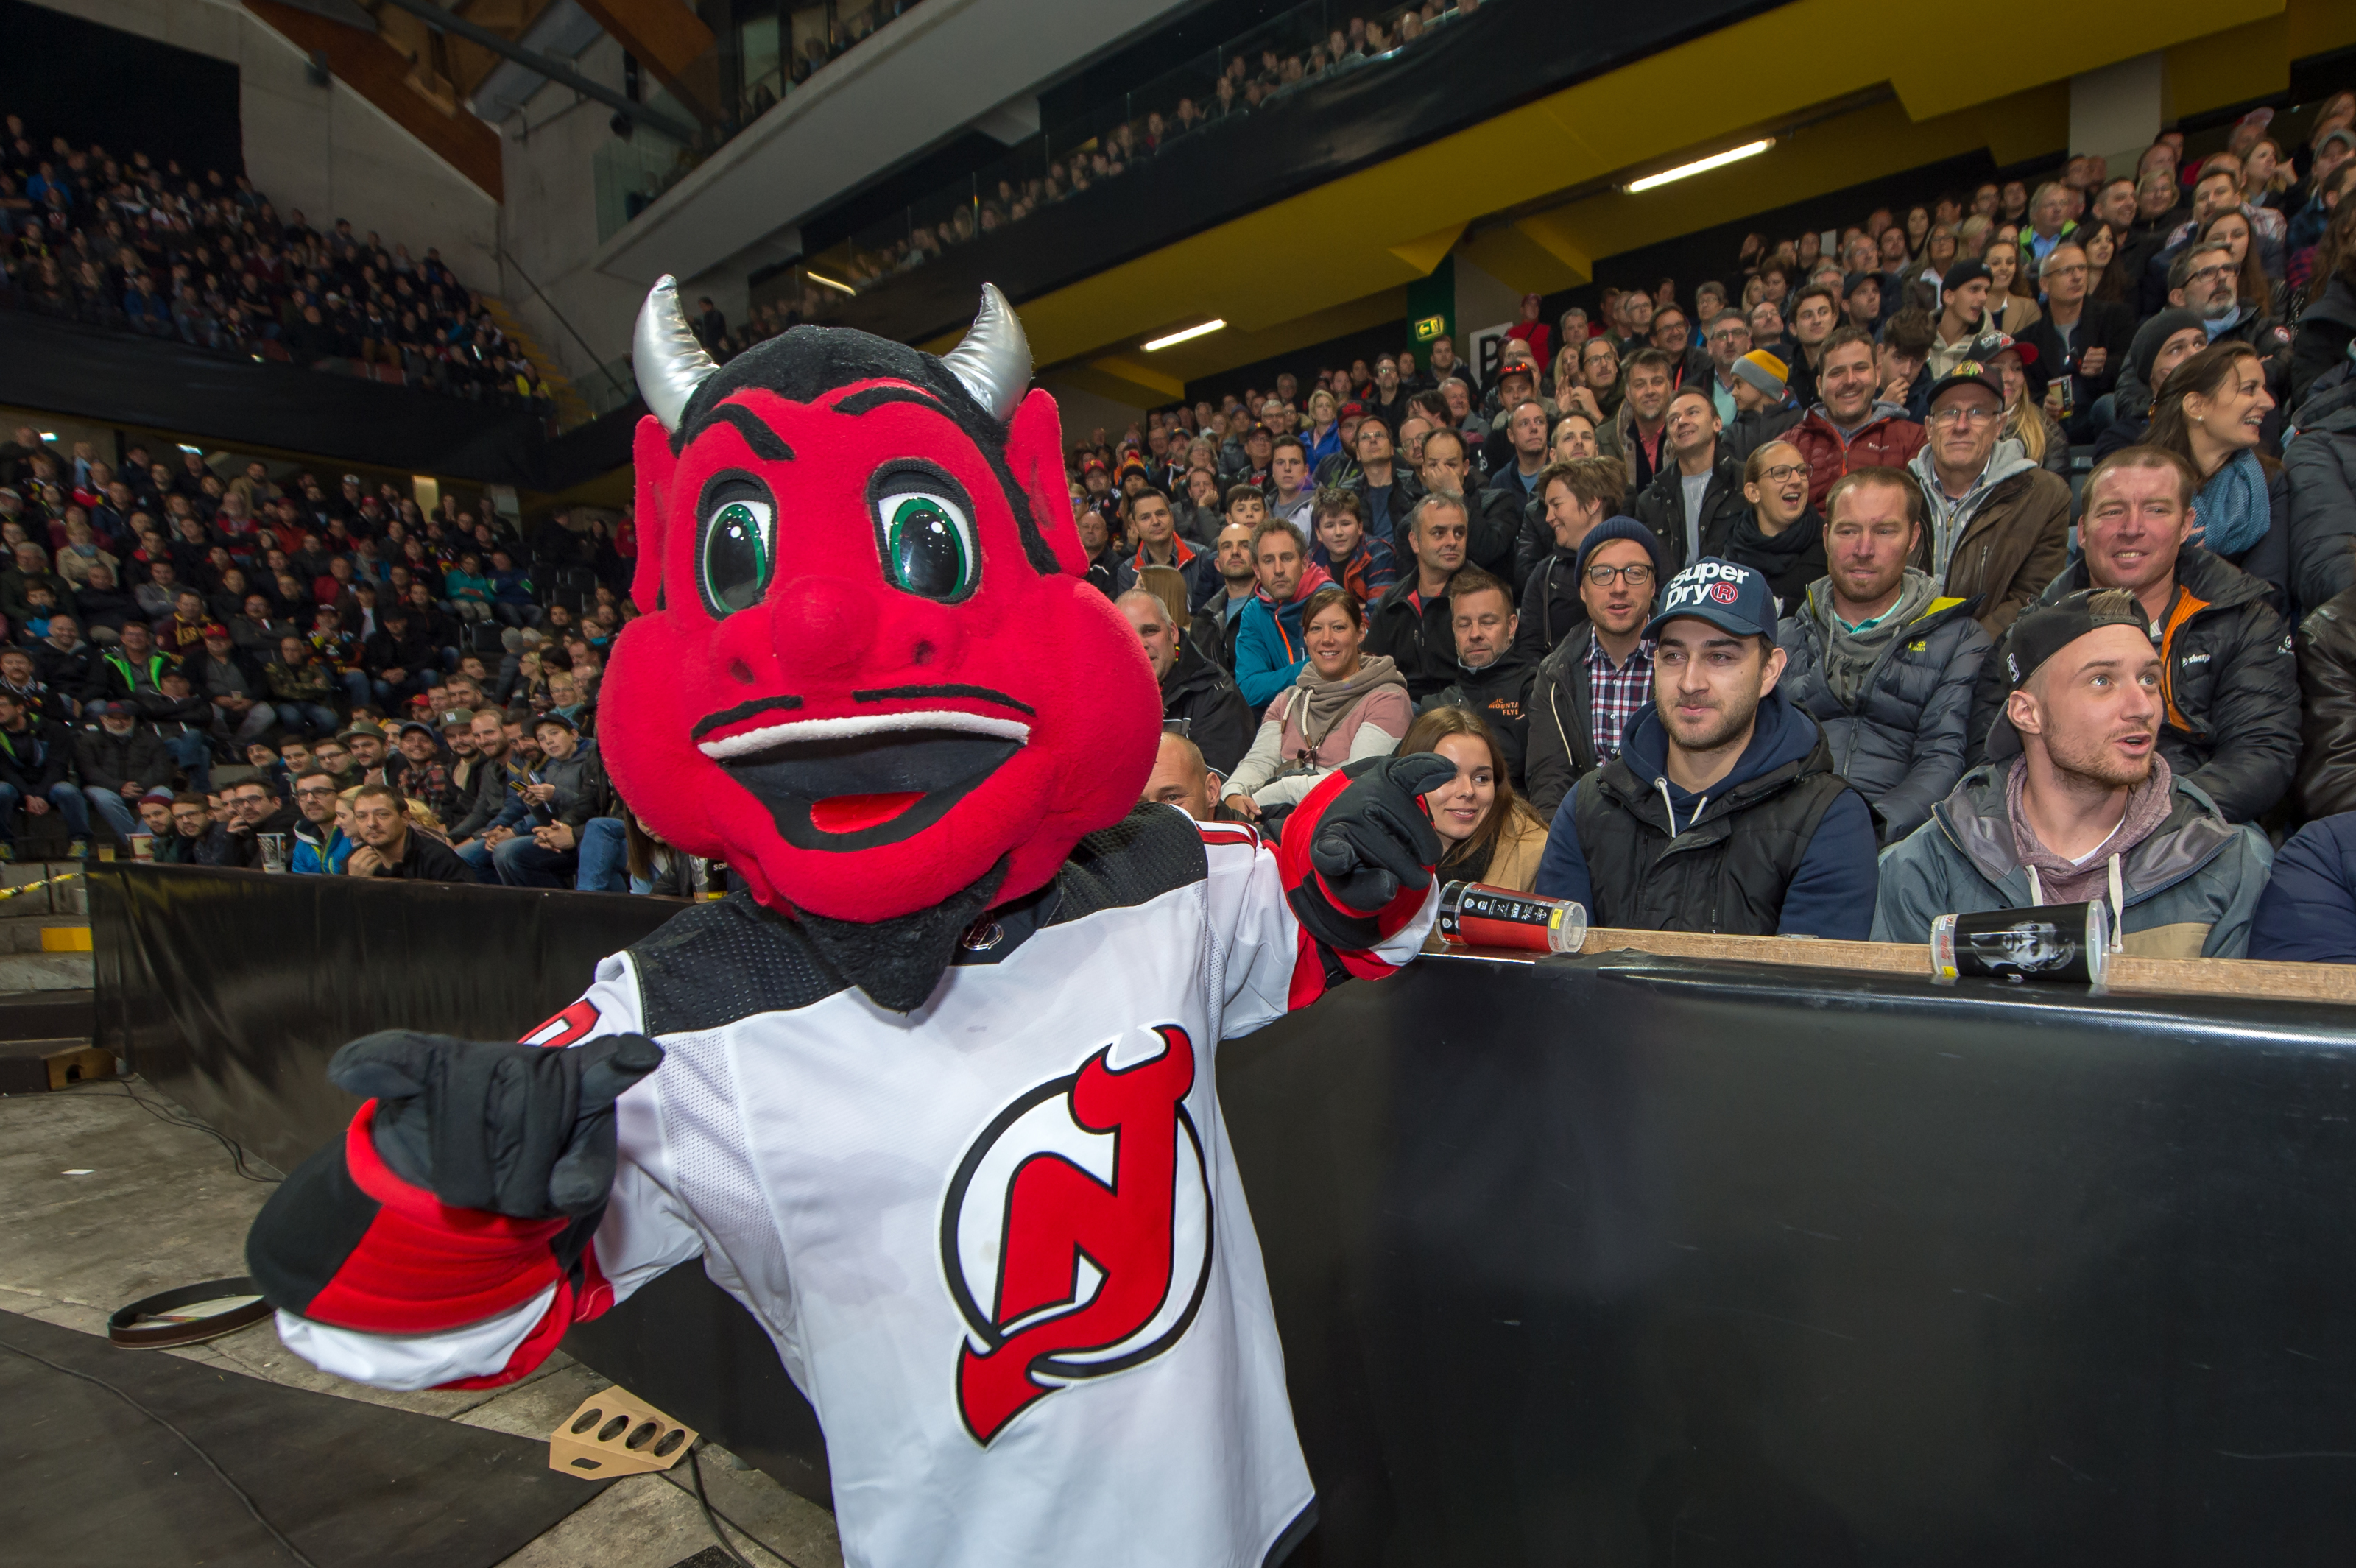 New Jersey Devils' mascot has biggest hit of offseason after shattering  glass at kid's birthday party